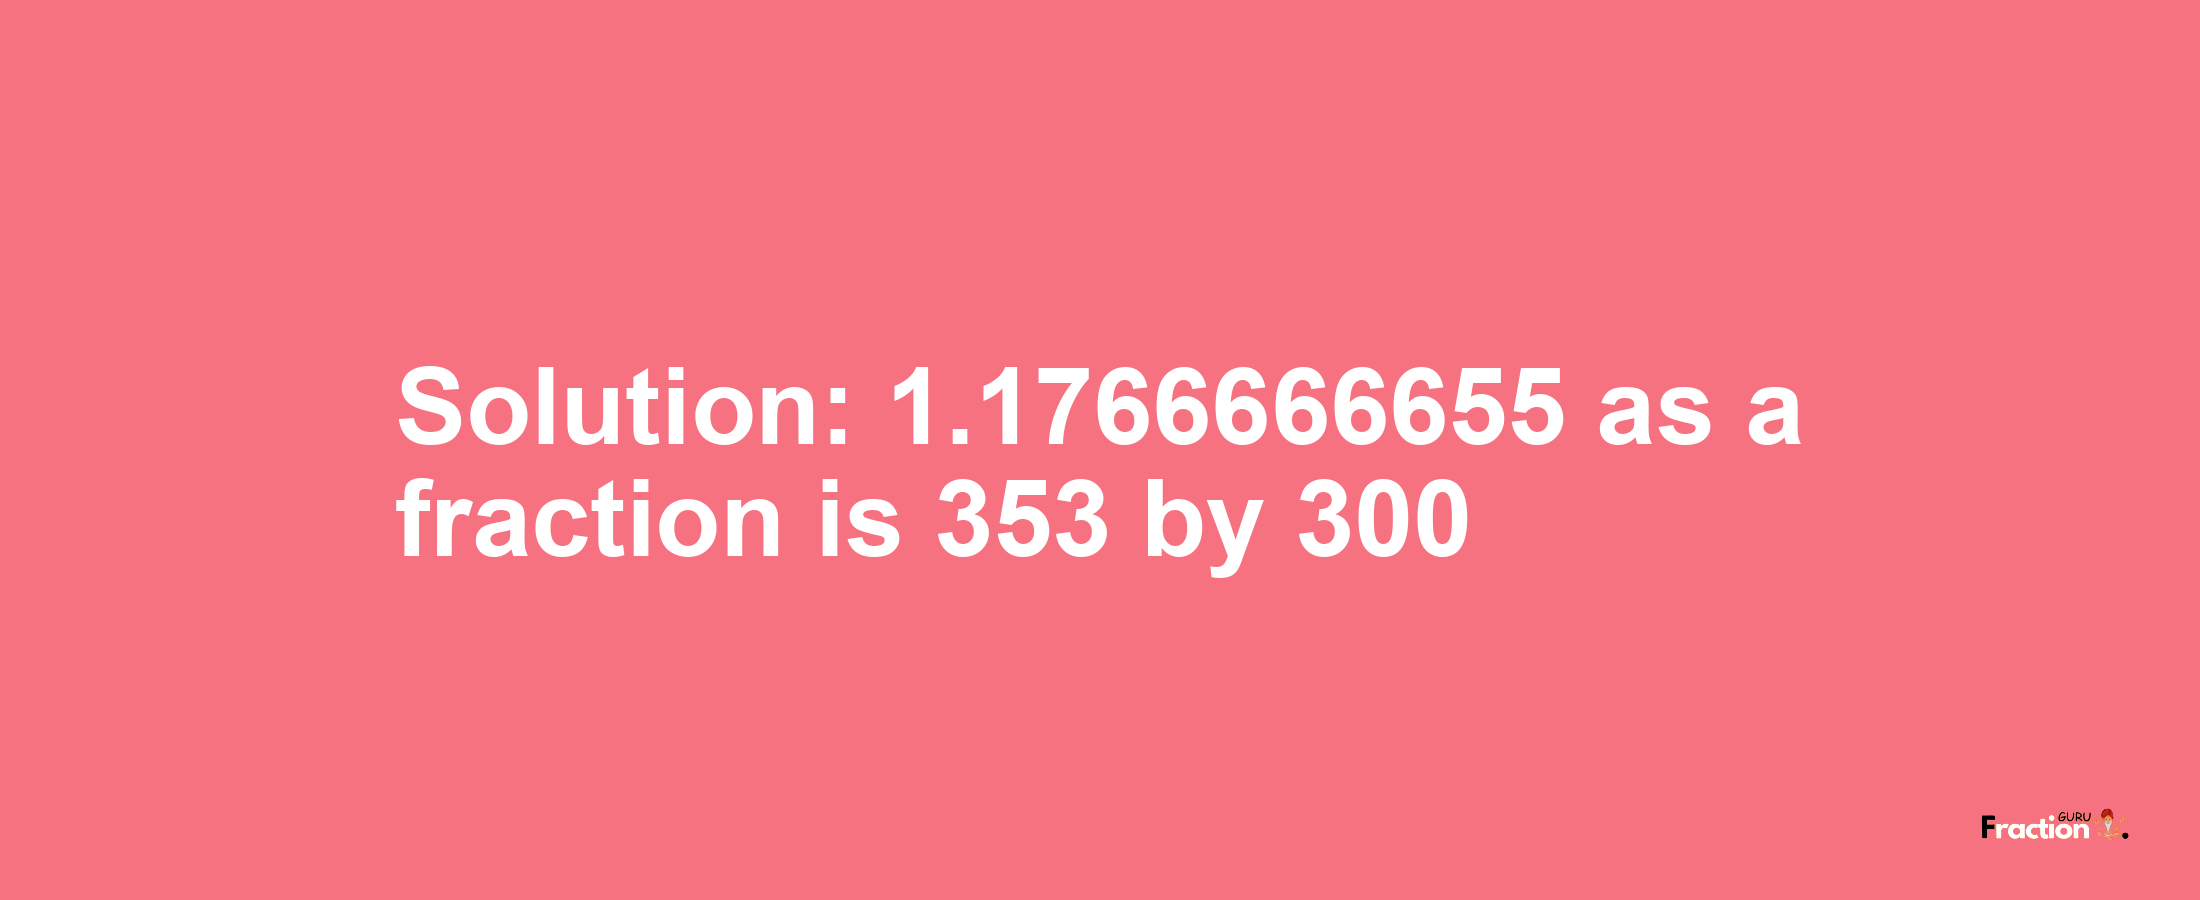 Solution:1.1766666655 as a fraction is 353/300